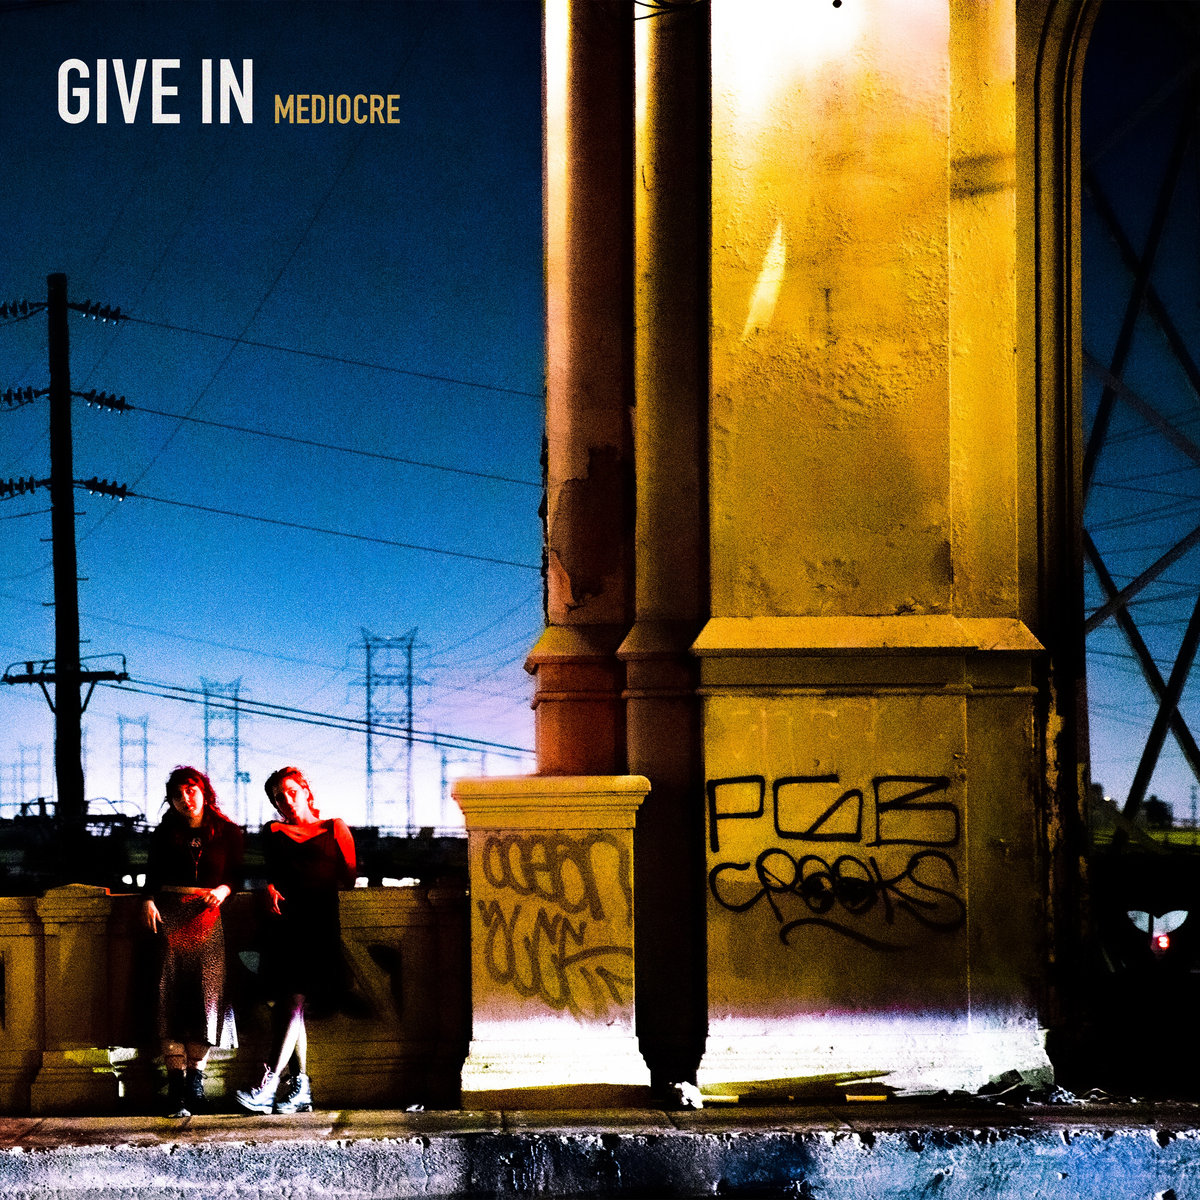 Mediocre Give In single art - two people standing next to a large stone pillar at night